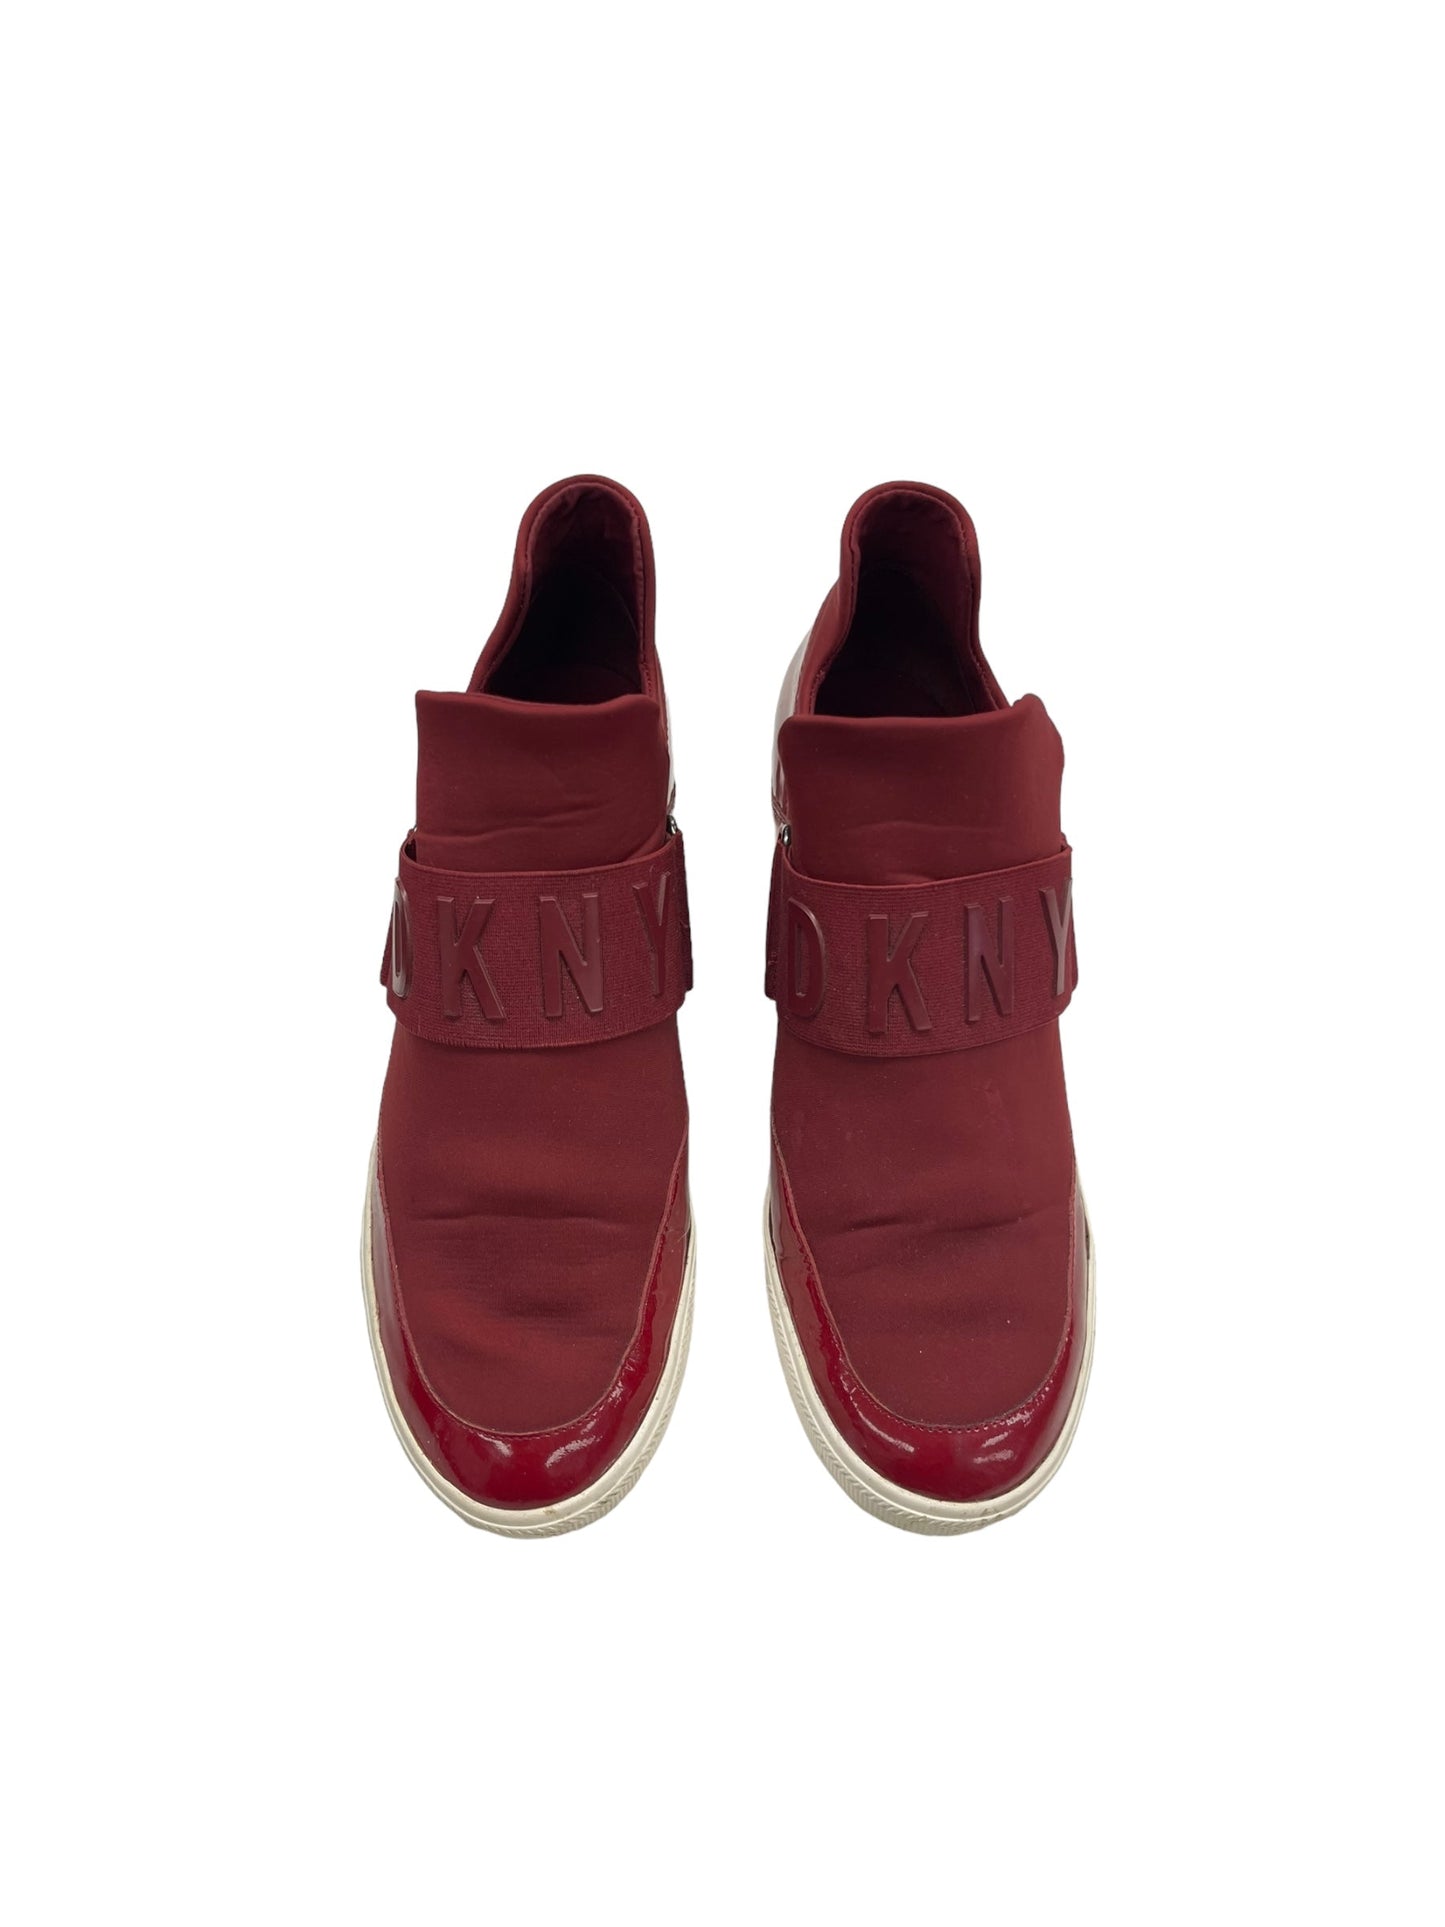 Red Shoes Sneakers Dkny, Size 10